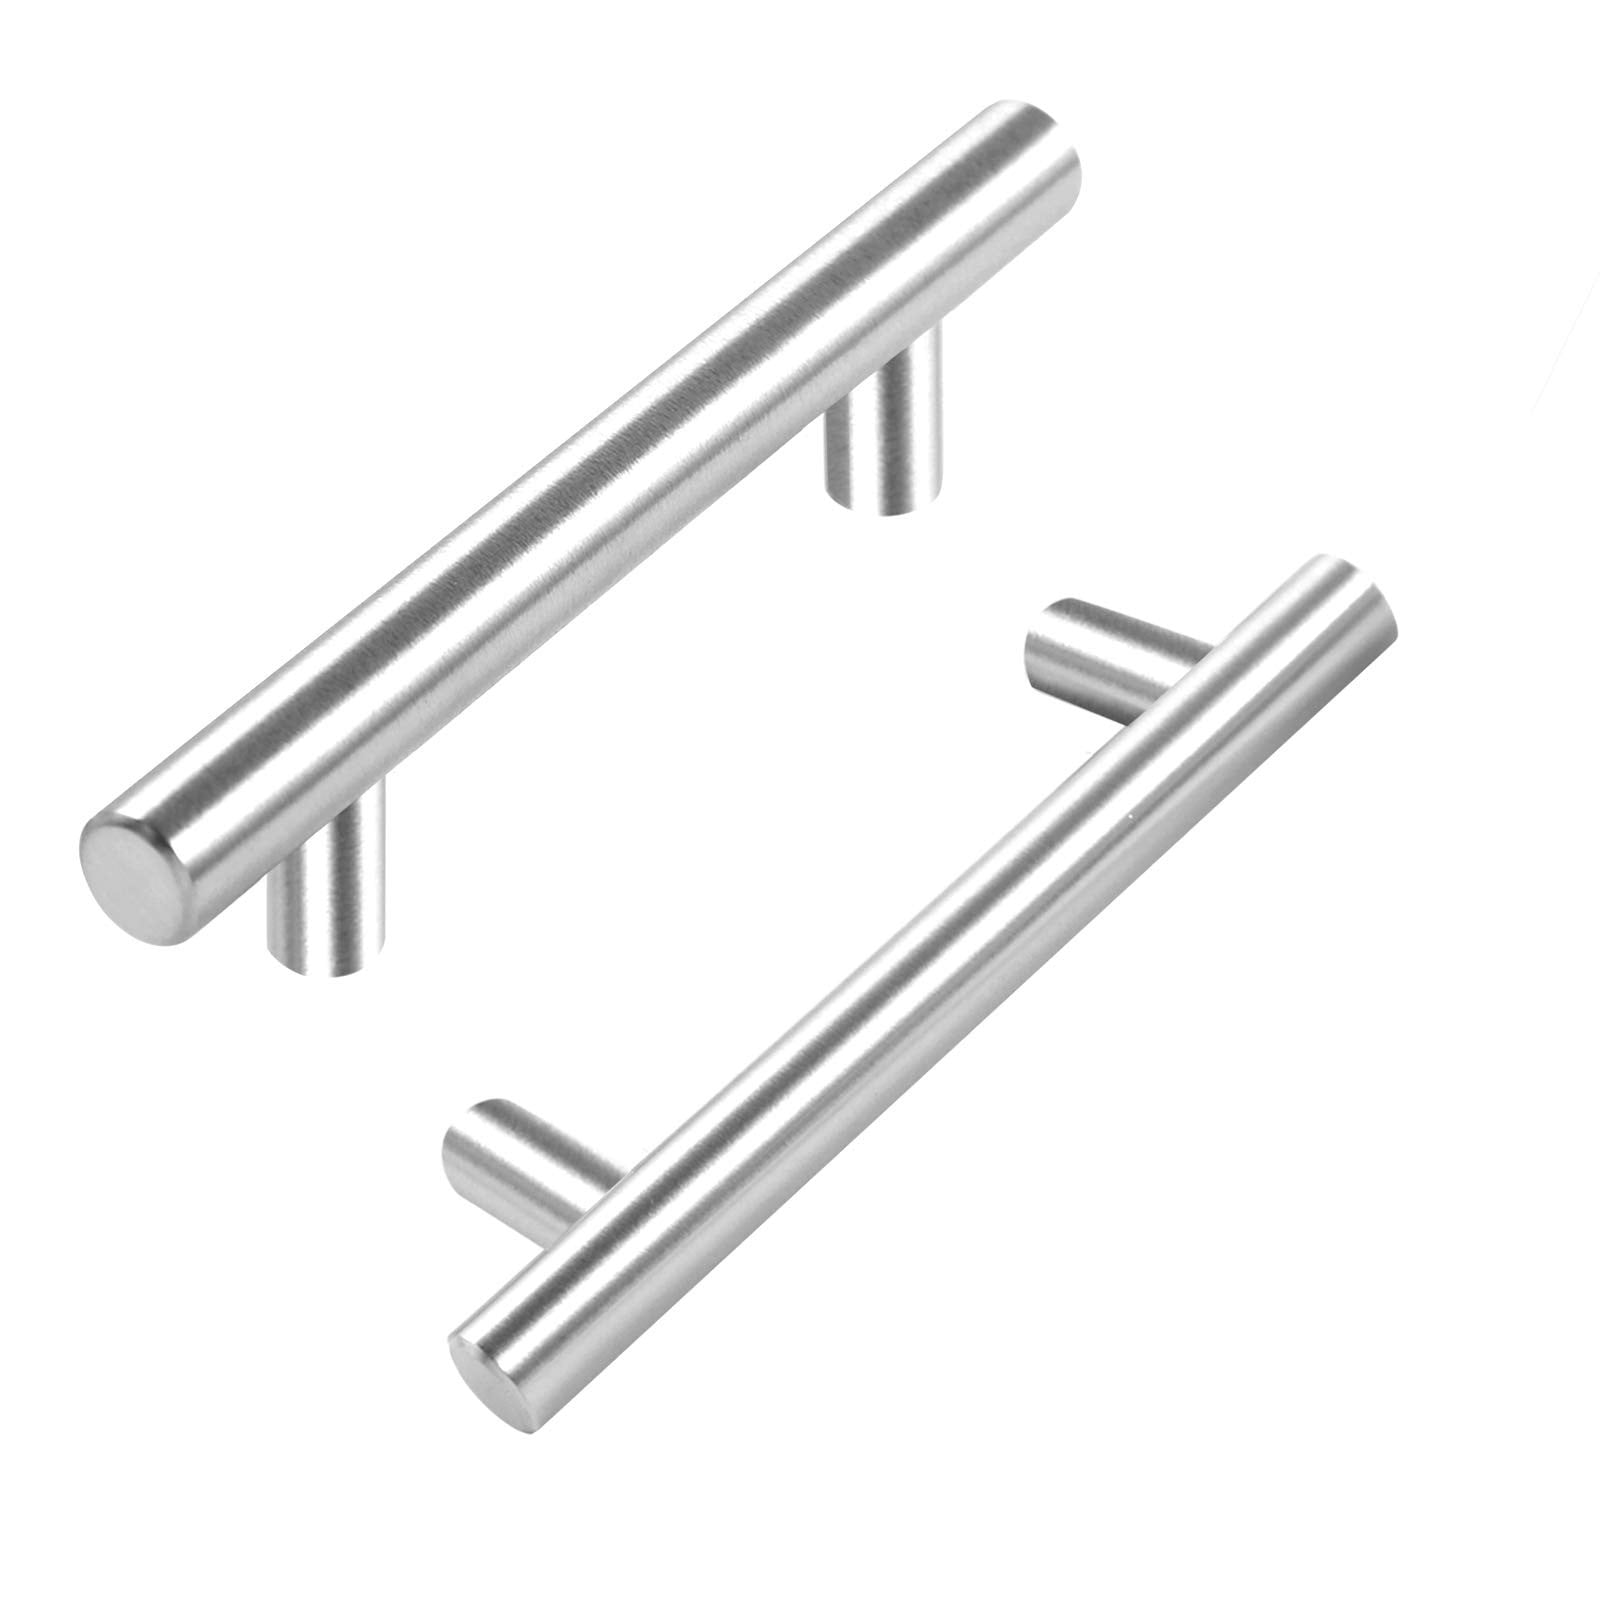 40PCs Stainless Steel Kitchen Cabinet Bookcase Drawer T Pulls Handles Knobs Pull 